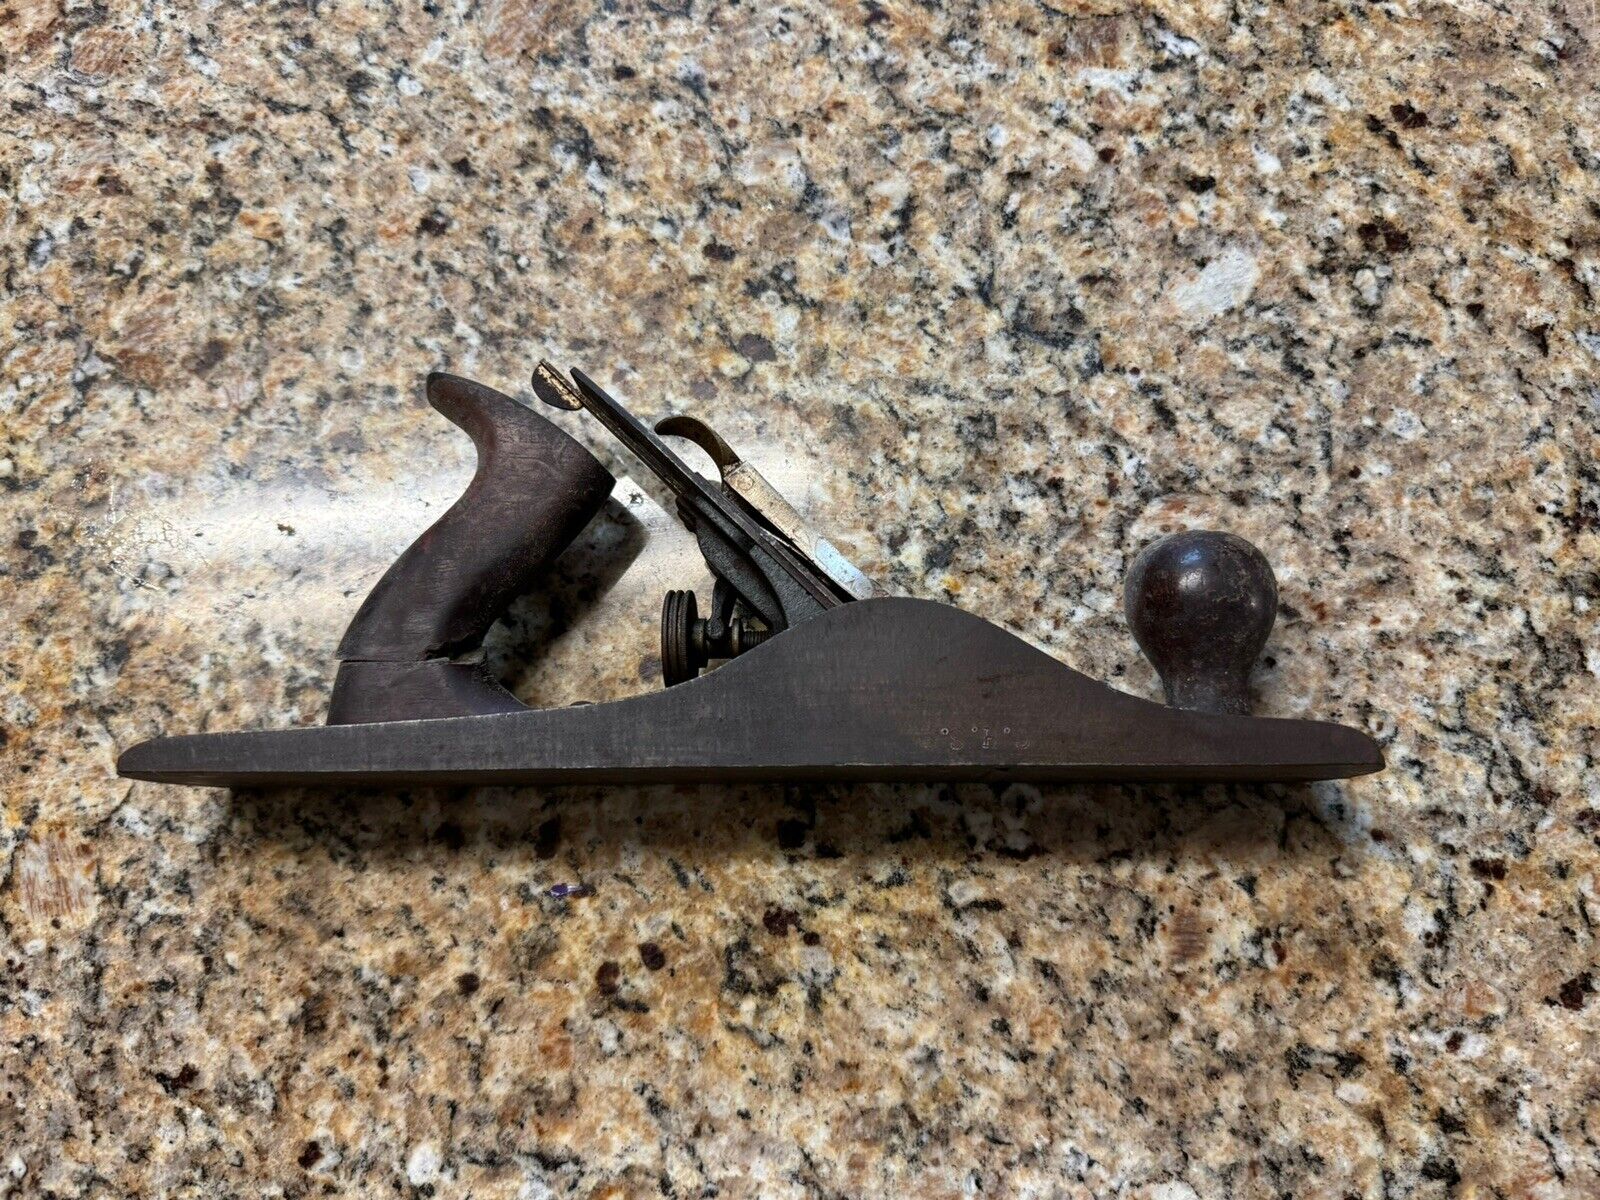 Vintage Stanley Bailey No 5 Carpenters Jack Plane Made in USA Woodworking Tool